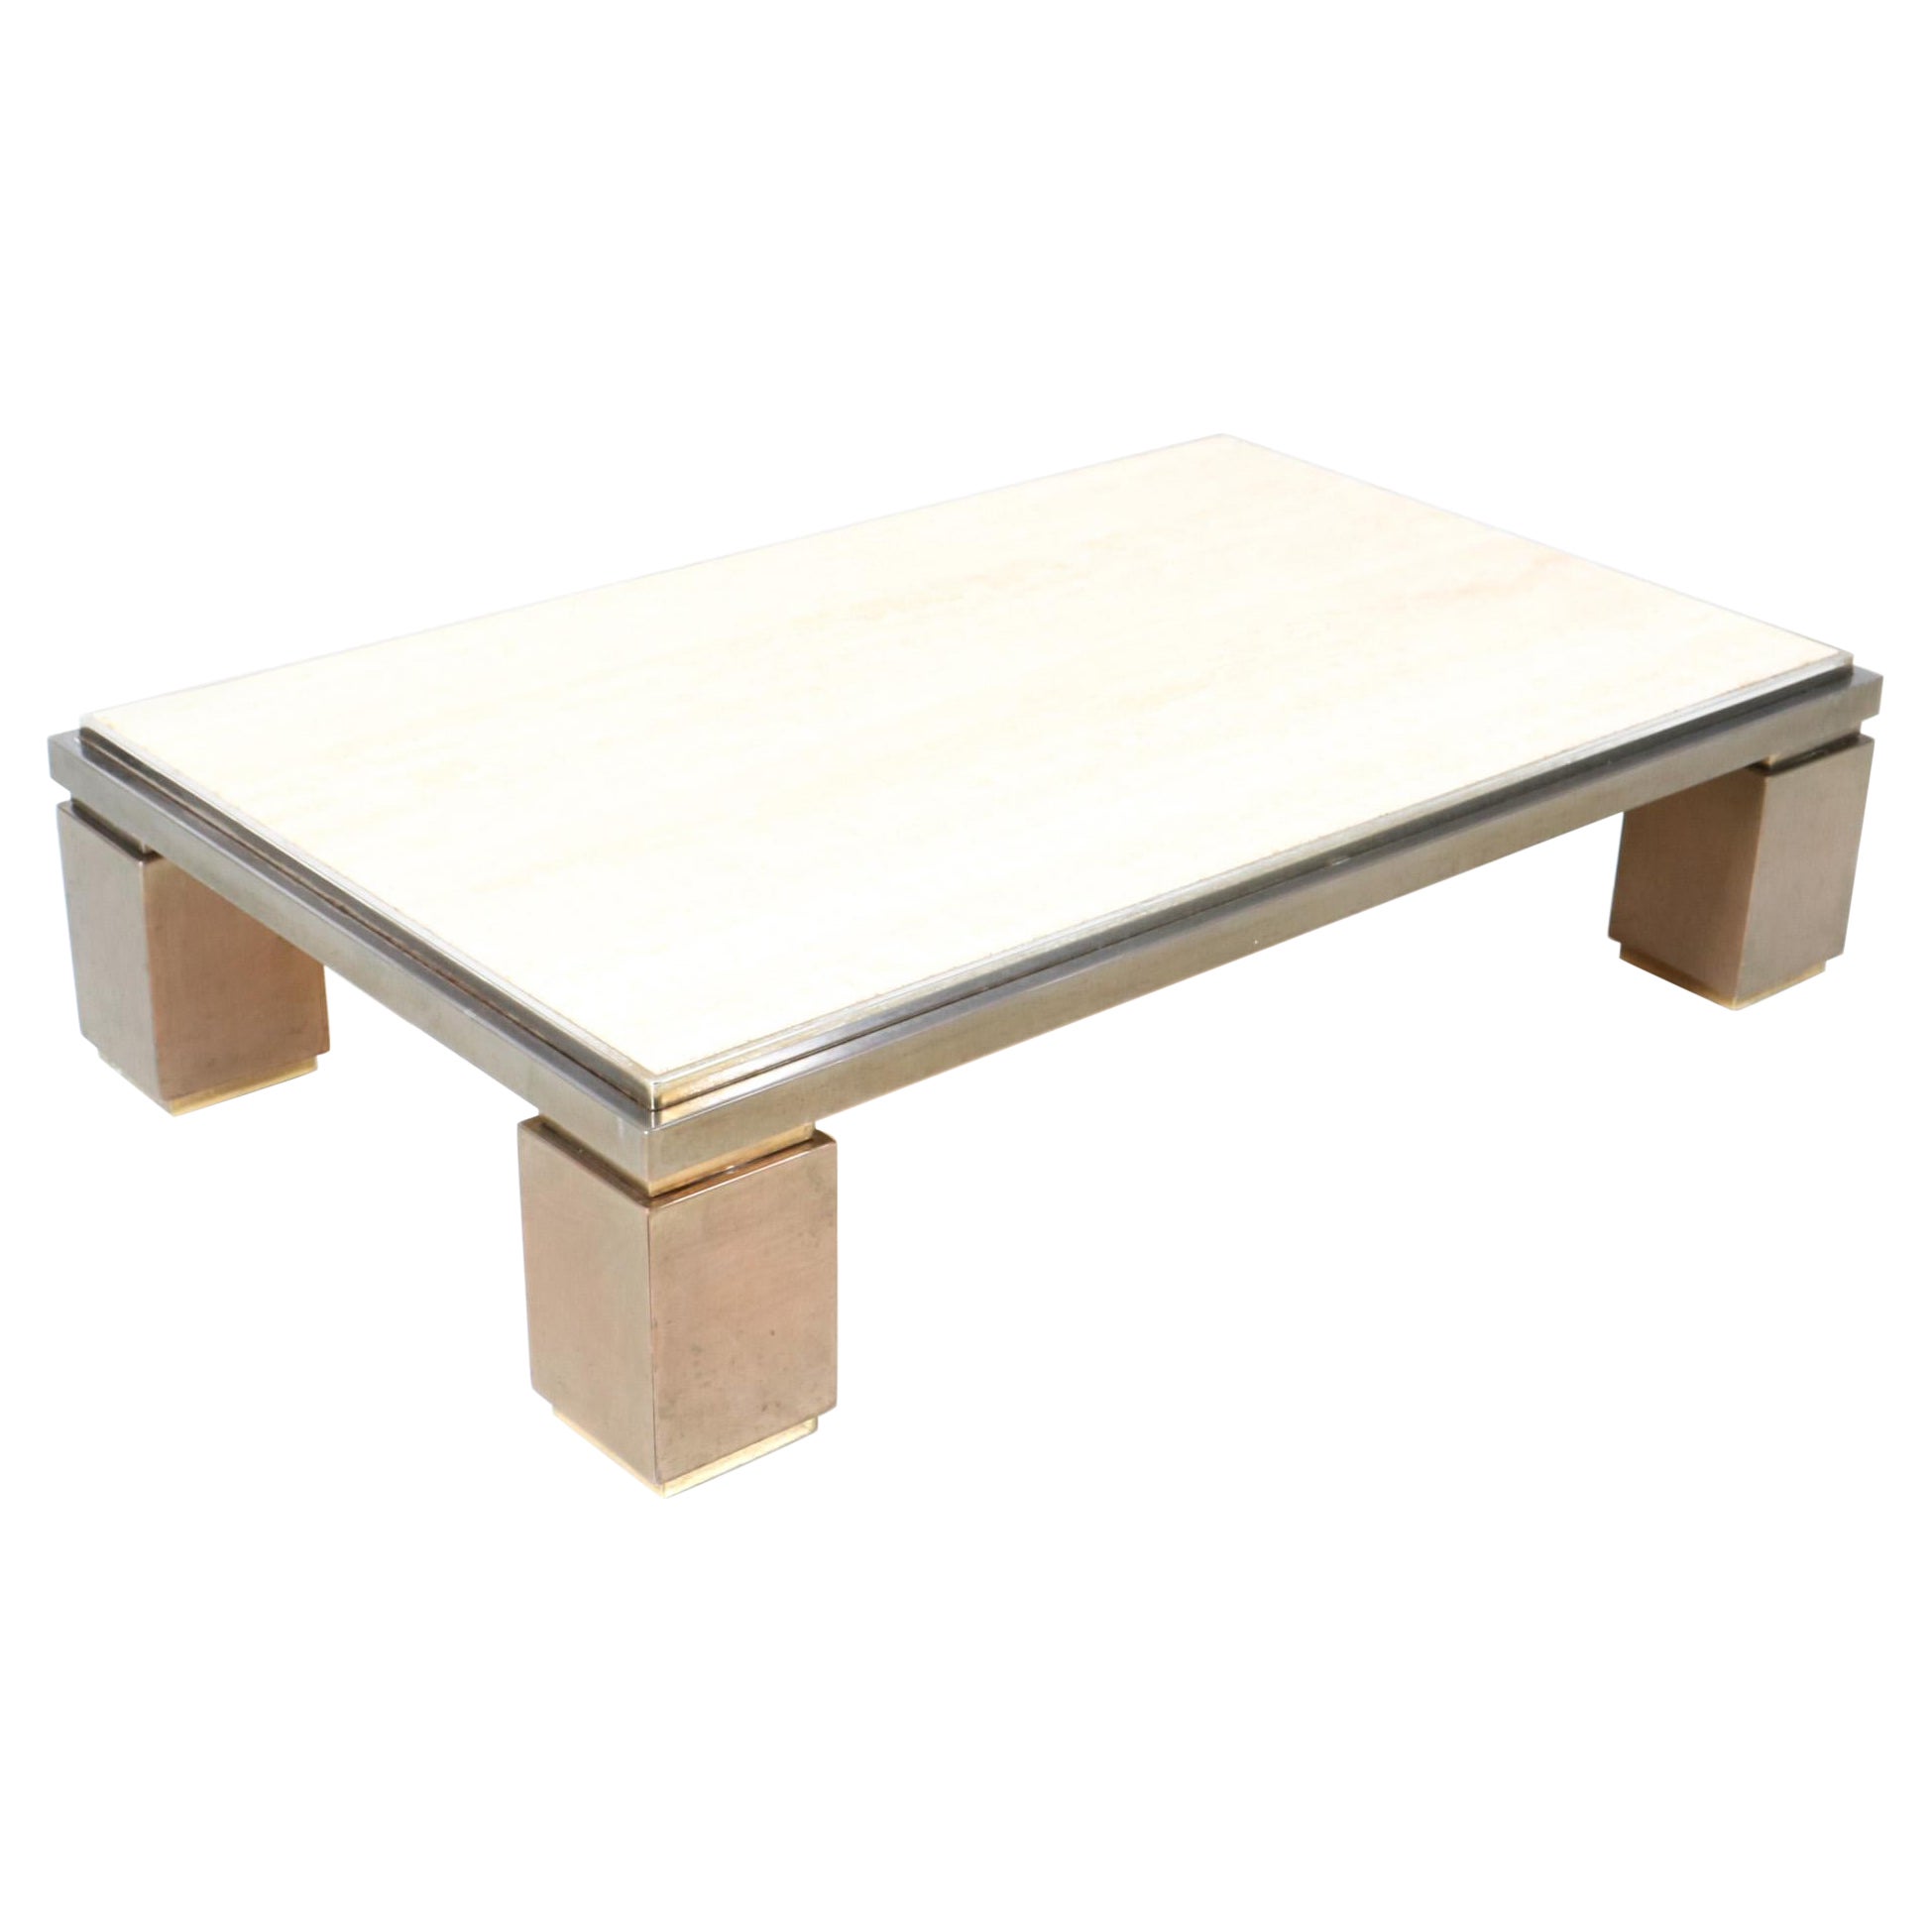 Hollywood Regency Large Coffee Table by Belgo Chrome with Travertine Top, 1970s For Sale